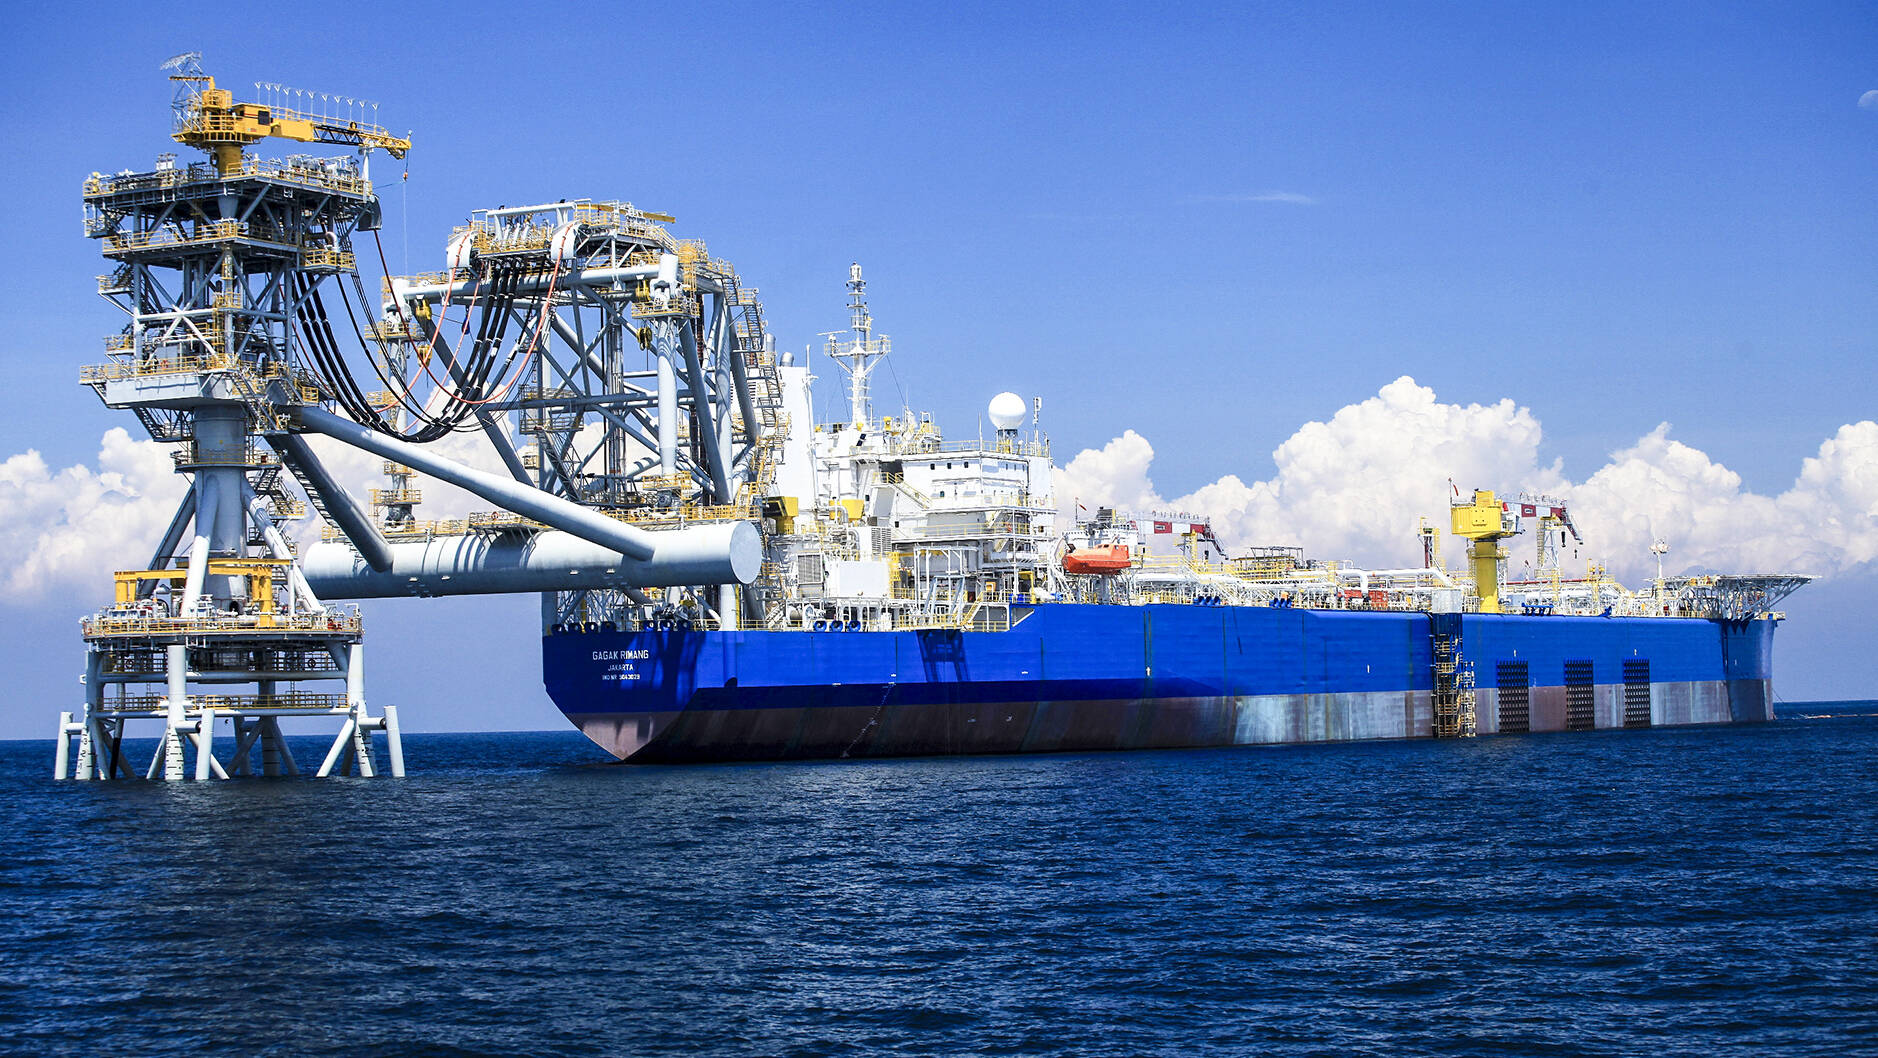 The FSO Gagak Rimang can hold a total of 2.1 million barrels